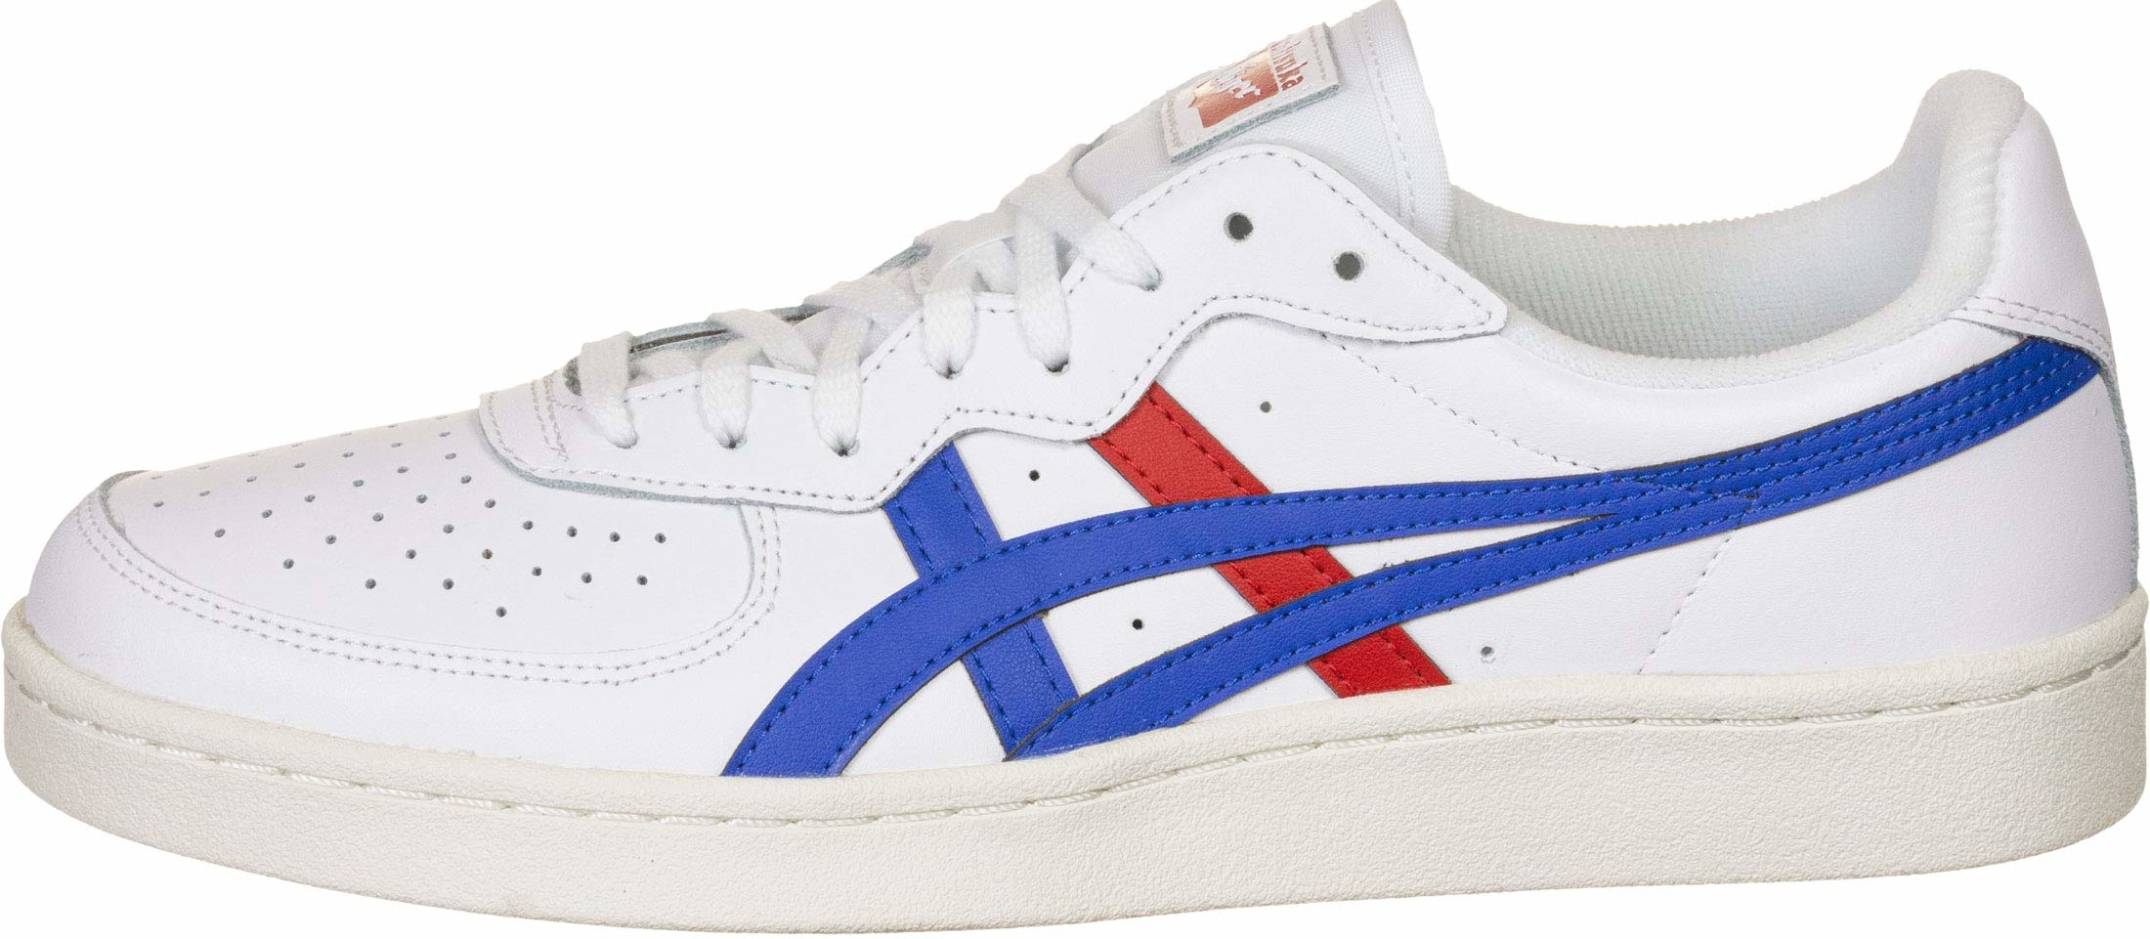 Decision Heir Wink Onitsuka Tiger GSM sneakers in 10+ colors (only $70) | RunRepeat